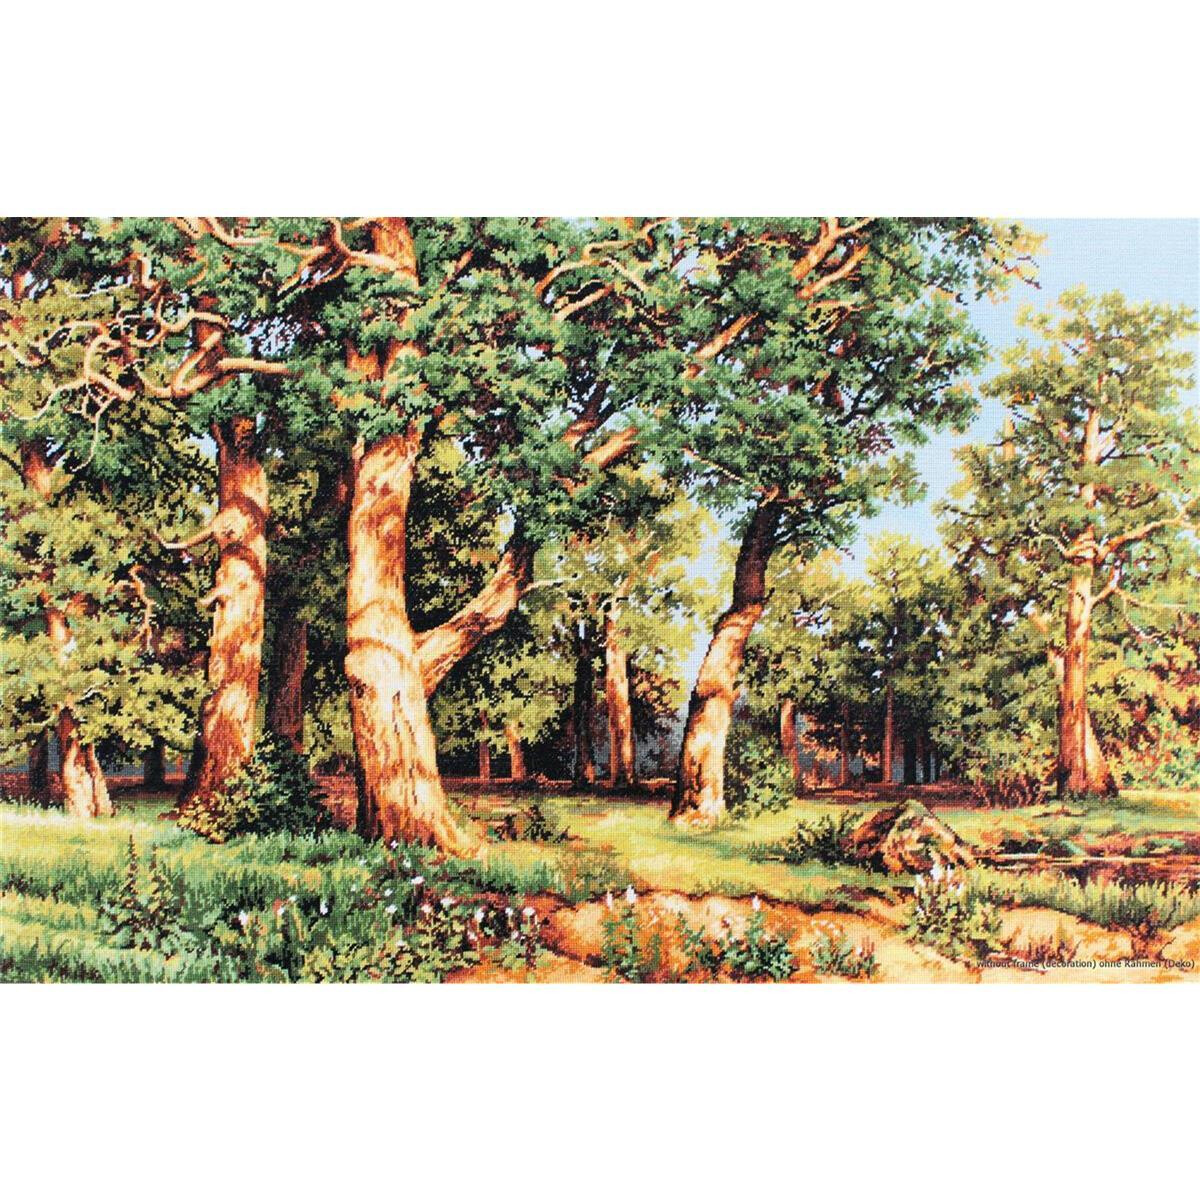 A sunlit forest scene with tall, mature trees and lush,...